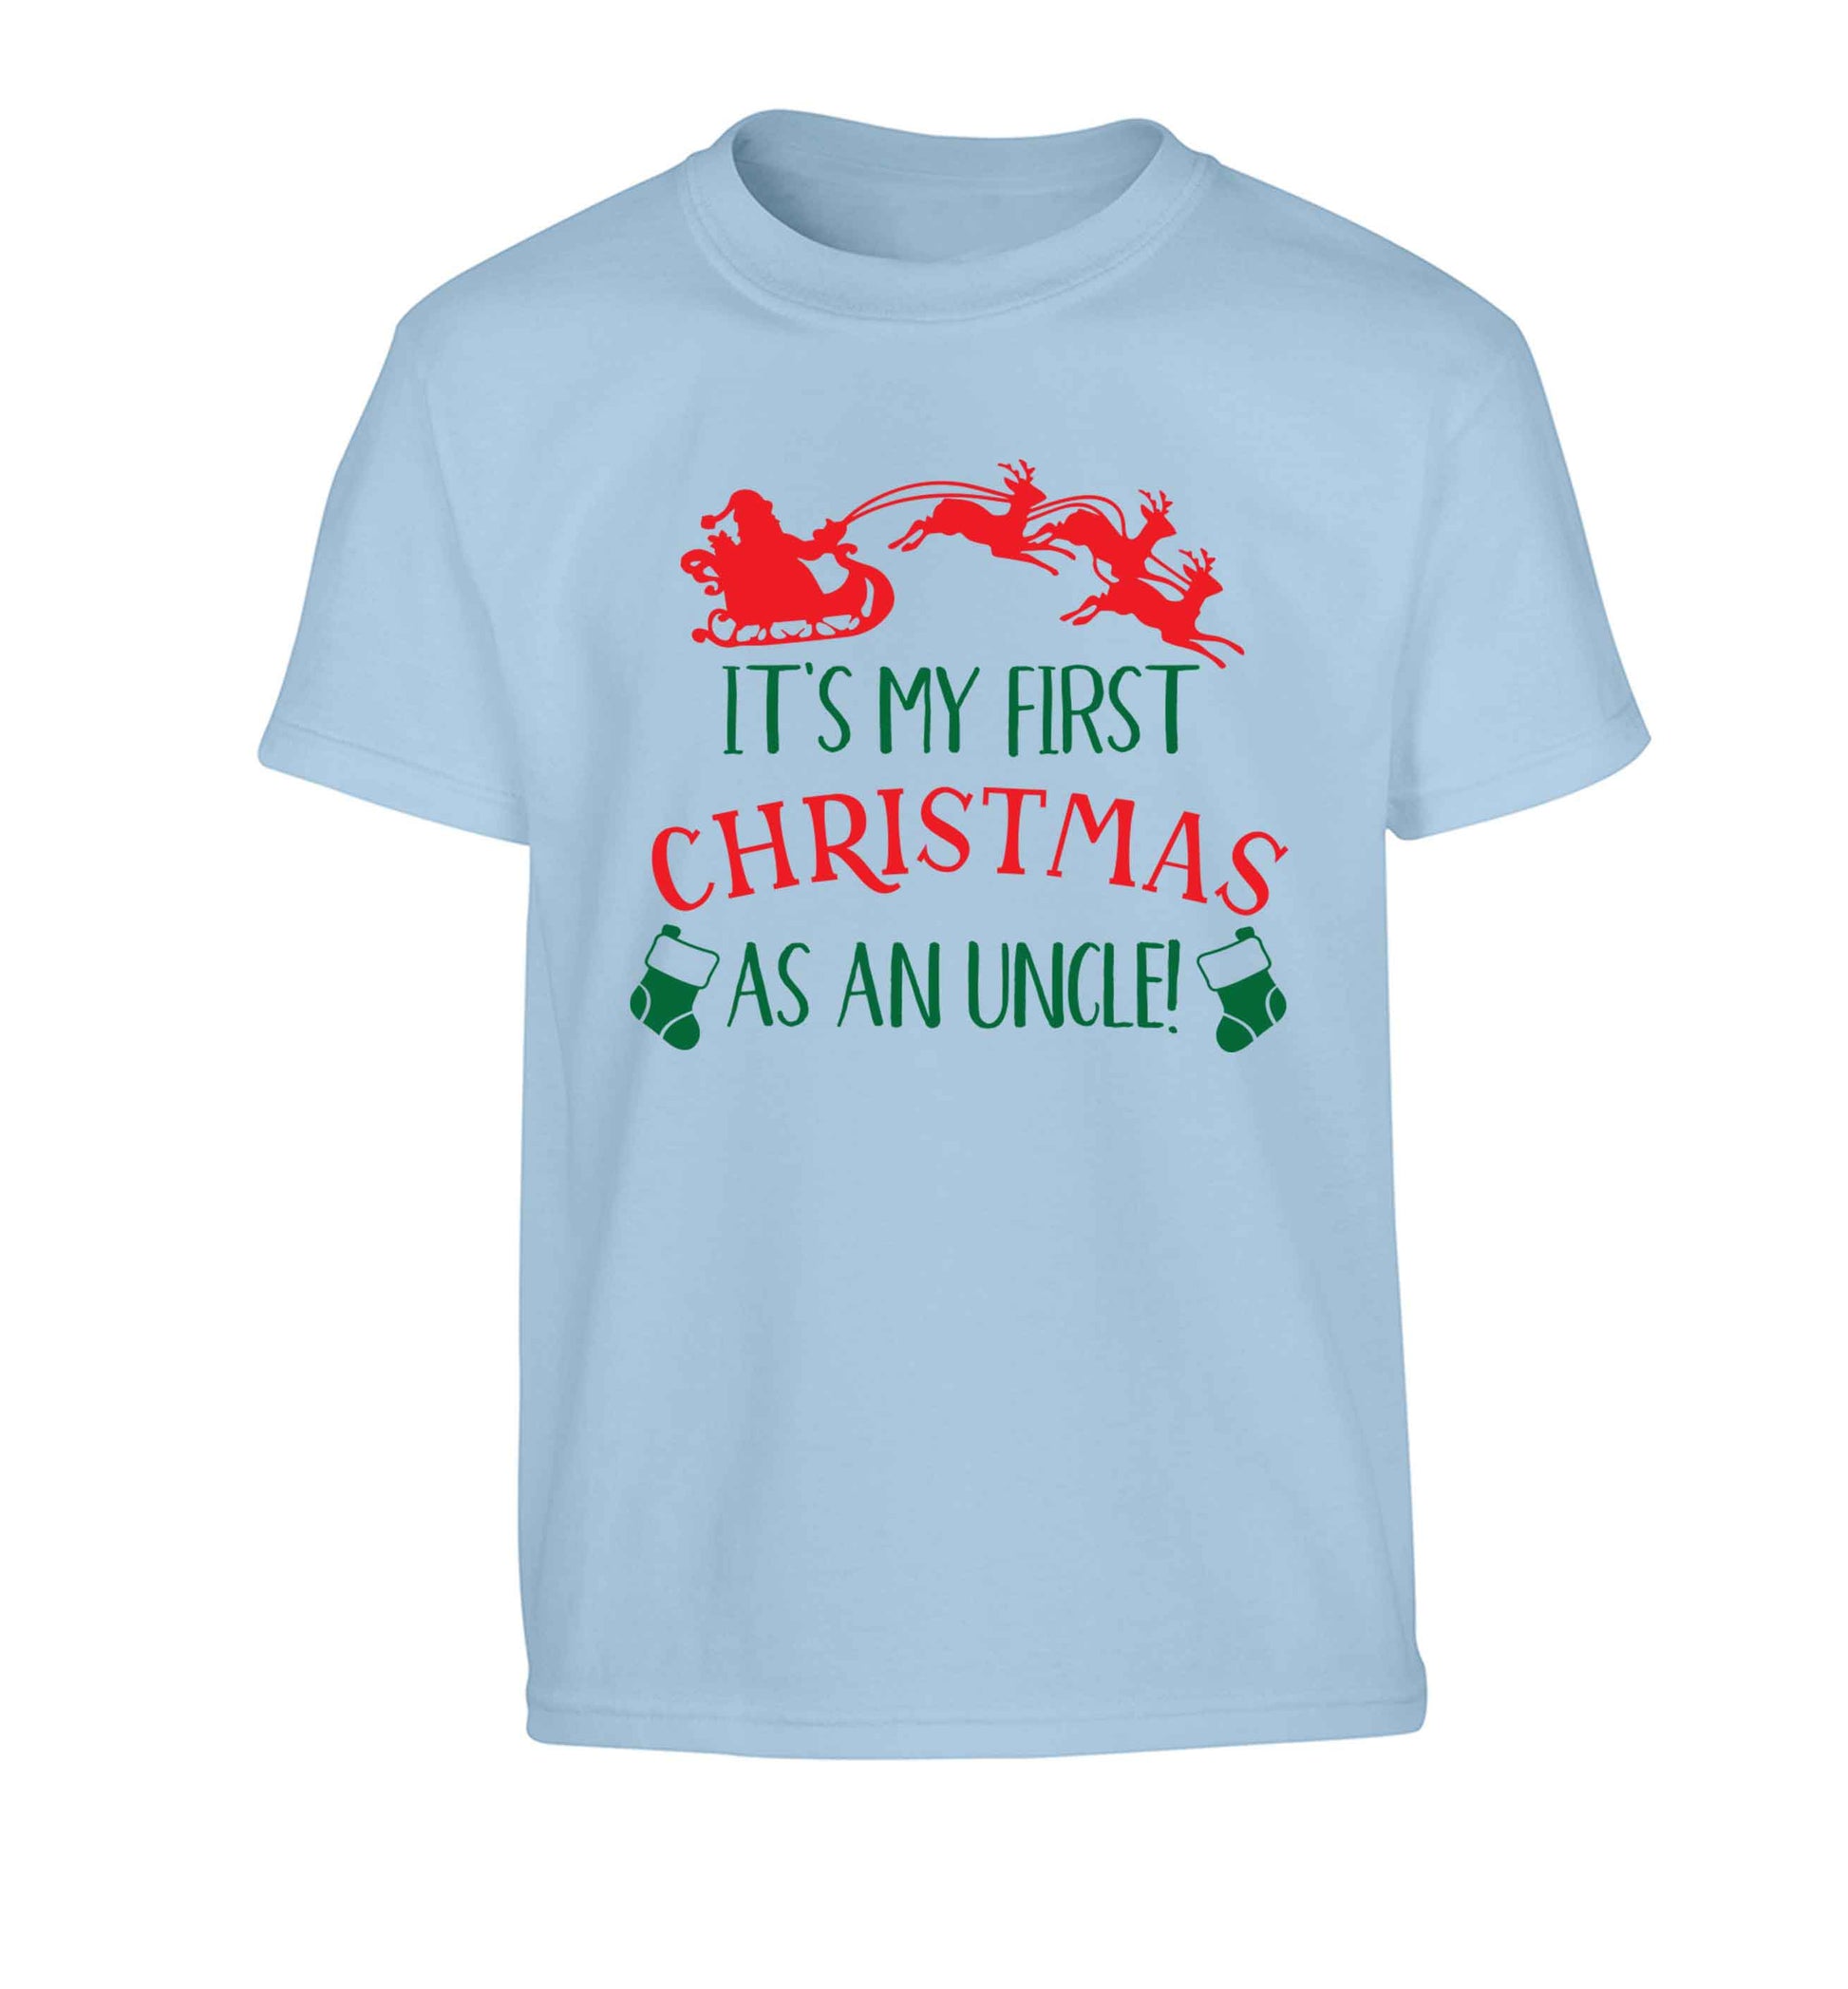 It's my first Christmas as an uncle! Children's light blue Tshirt 12-13 Years